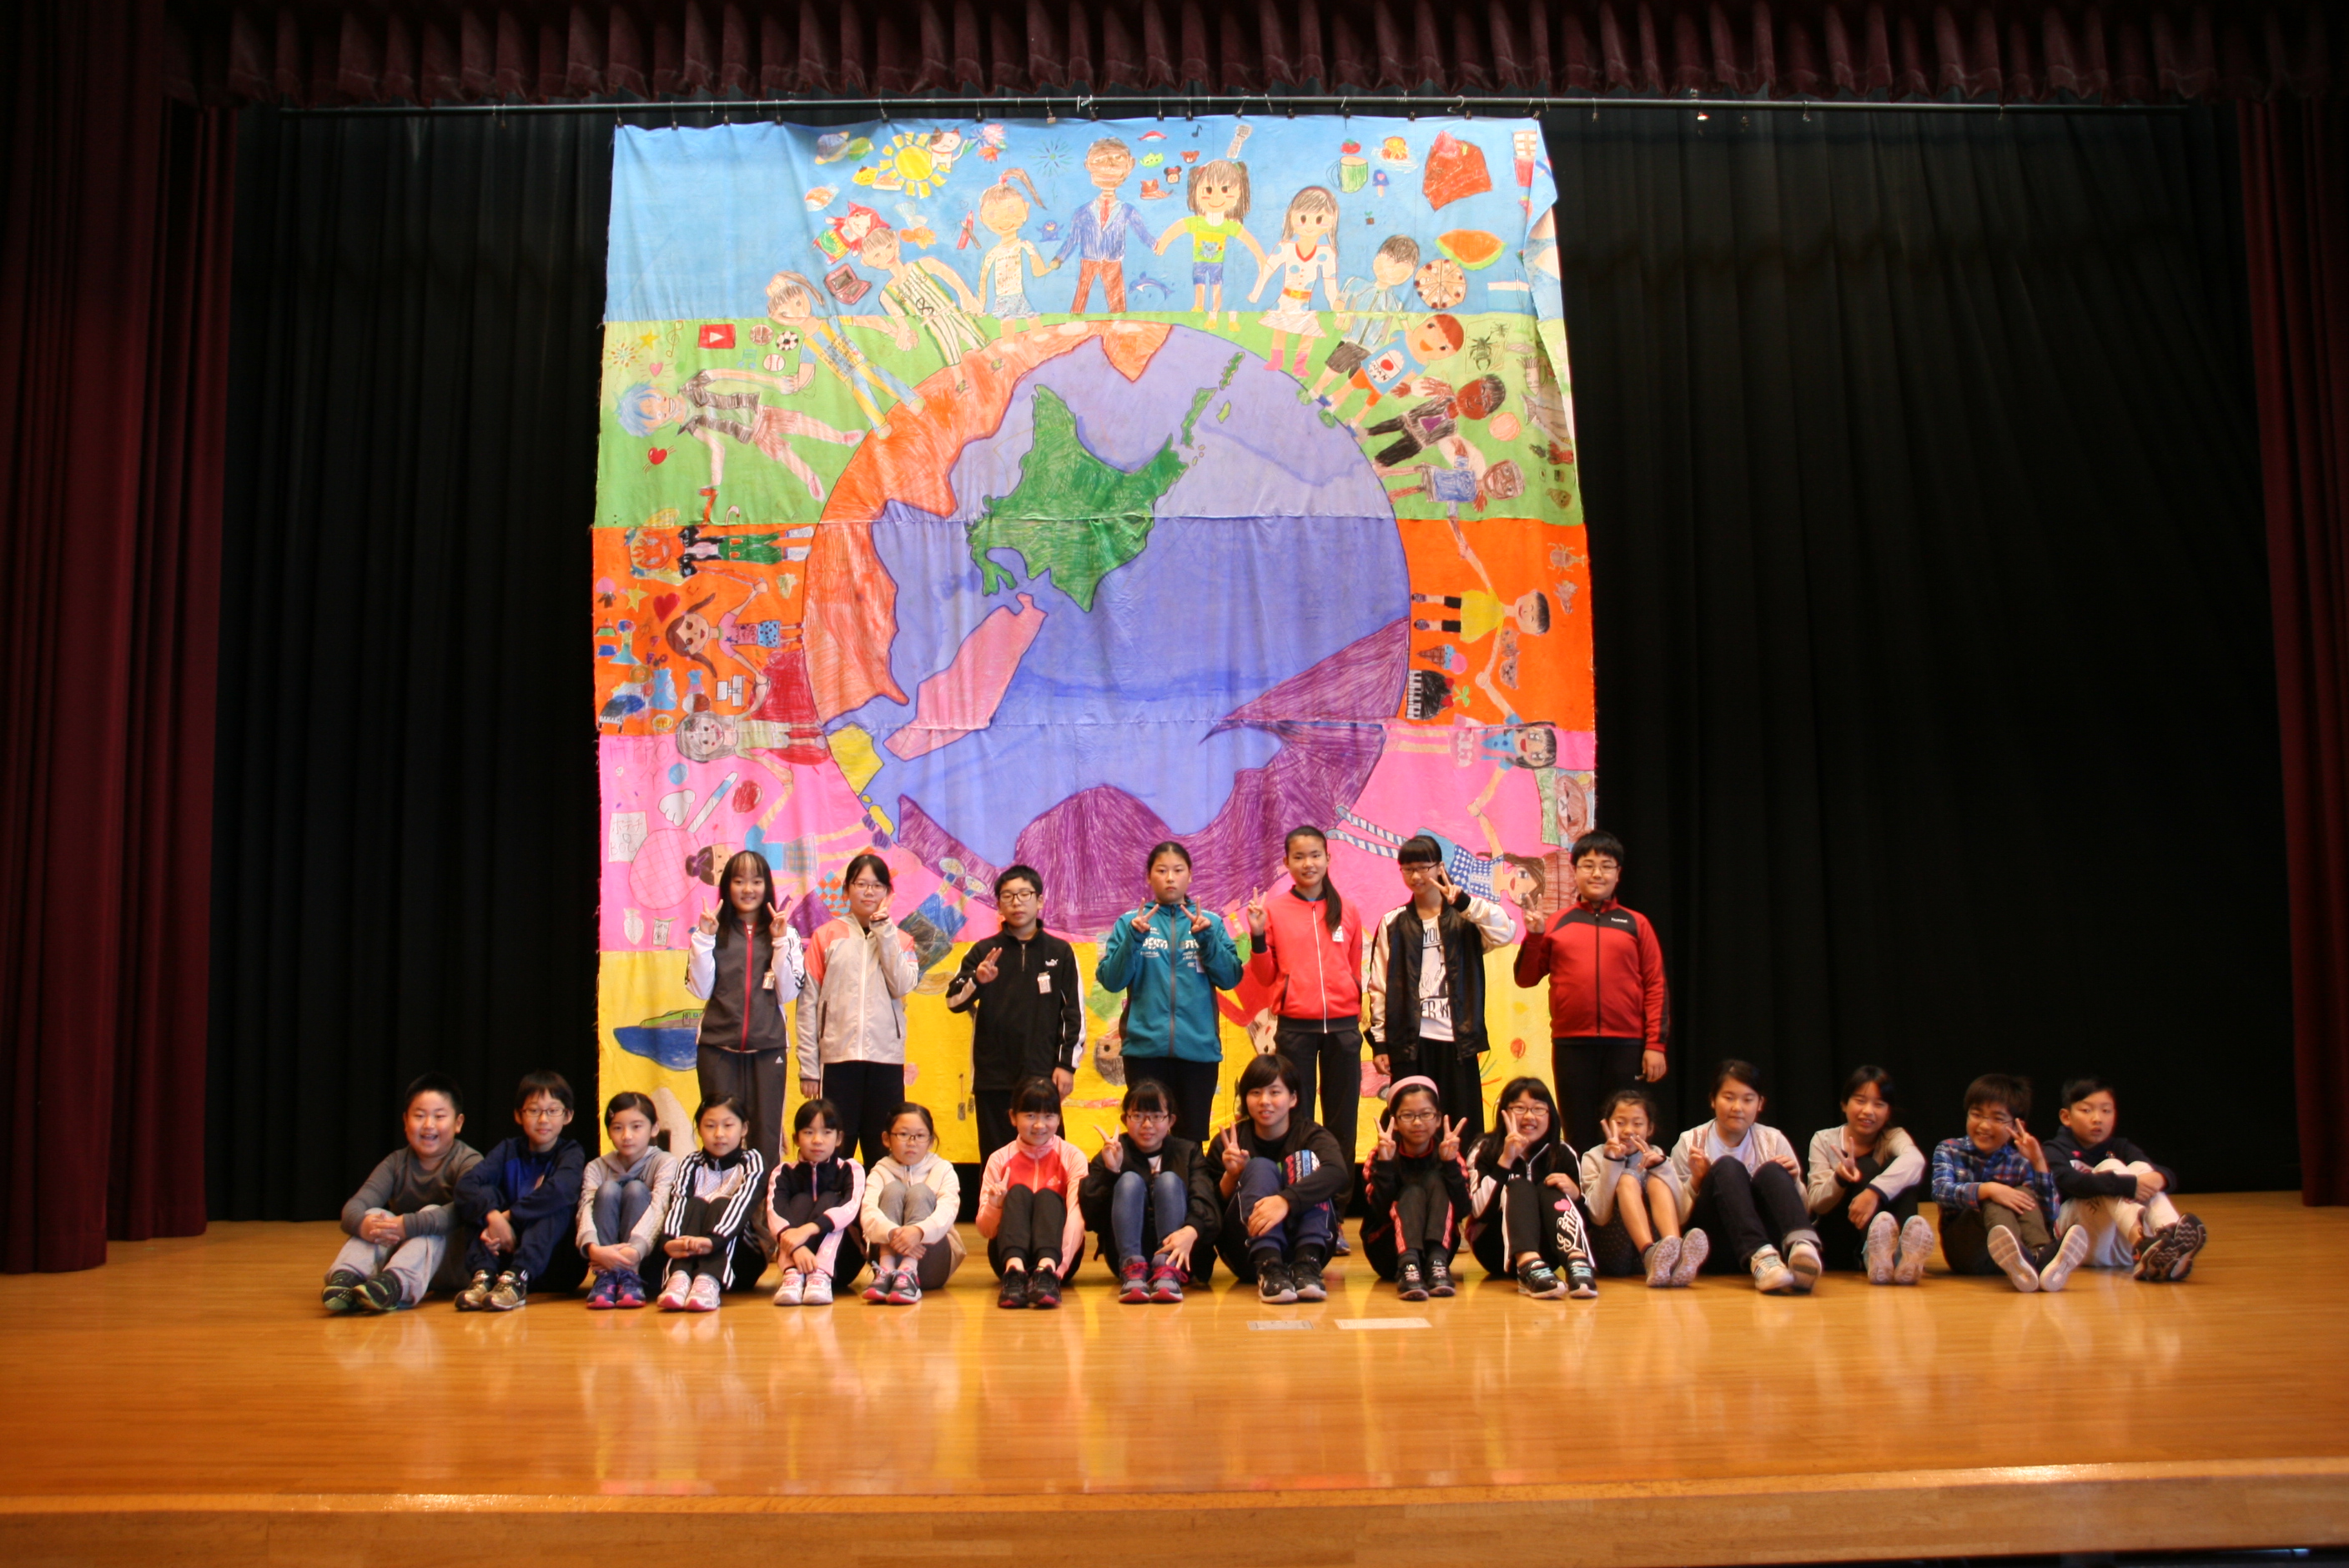 The Biggest Painting in the World 2020 Hokuto City was completed